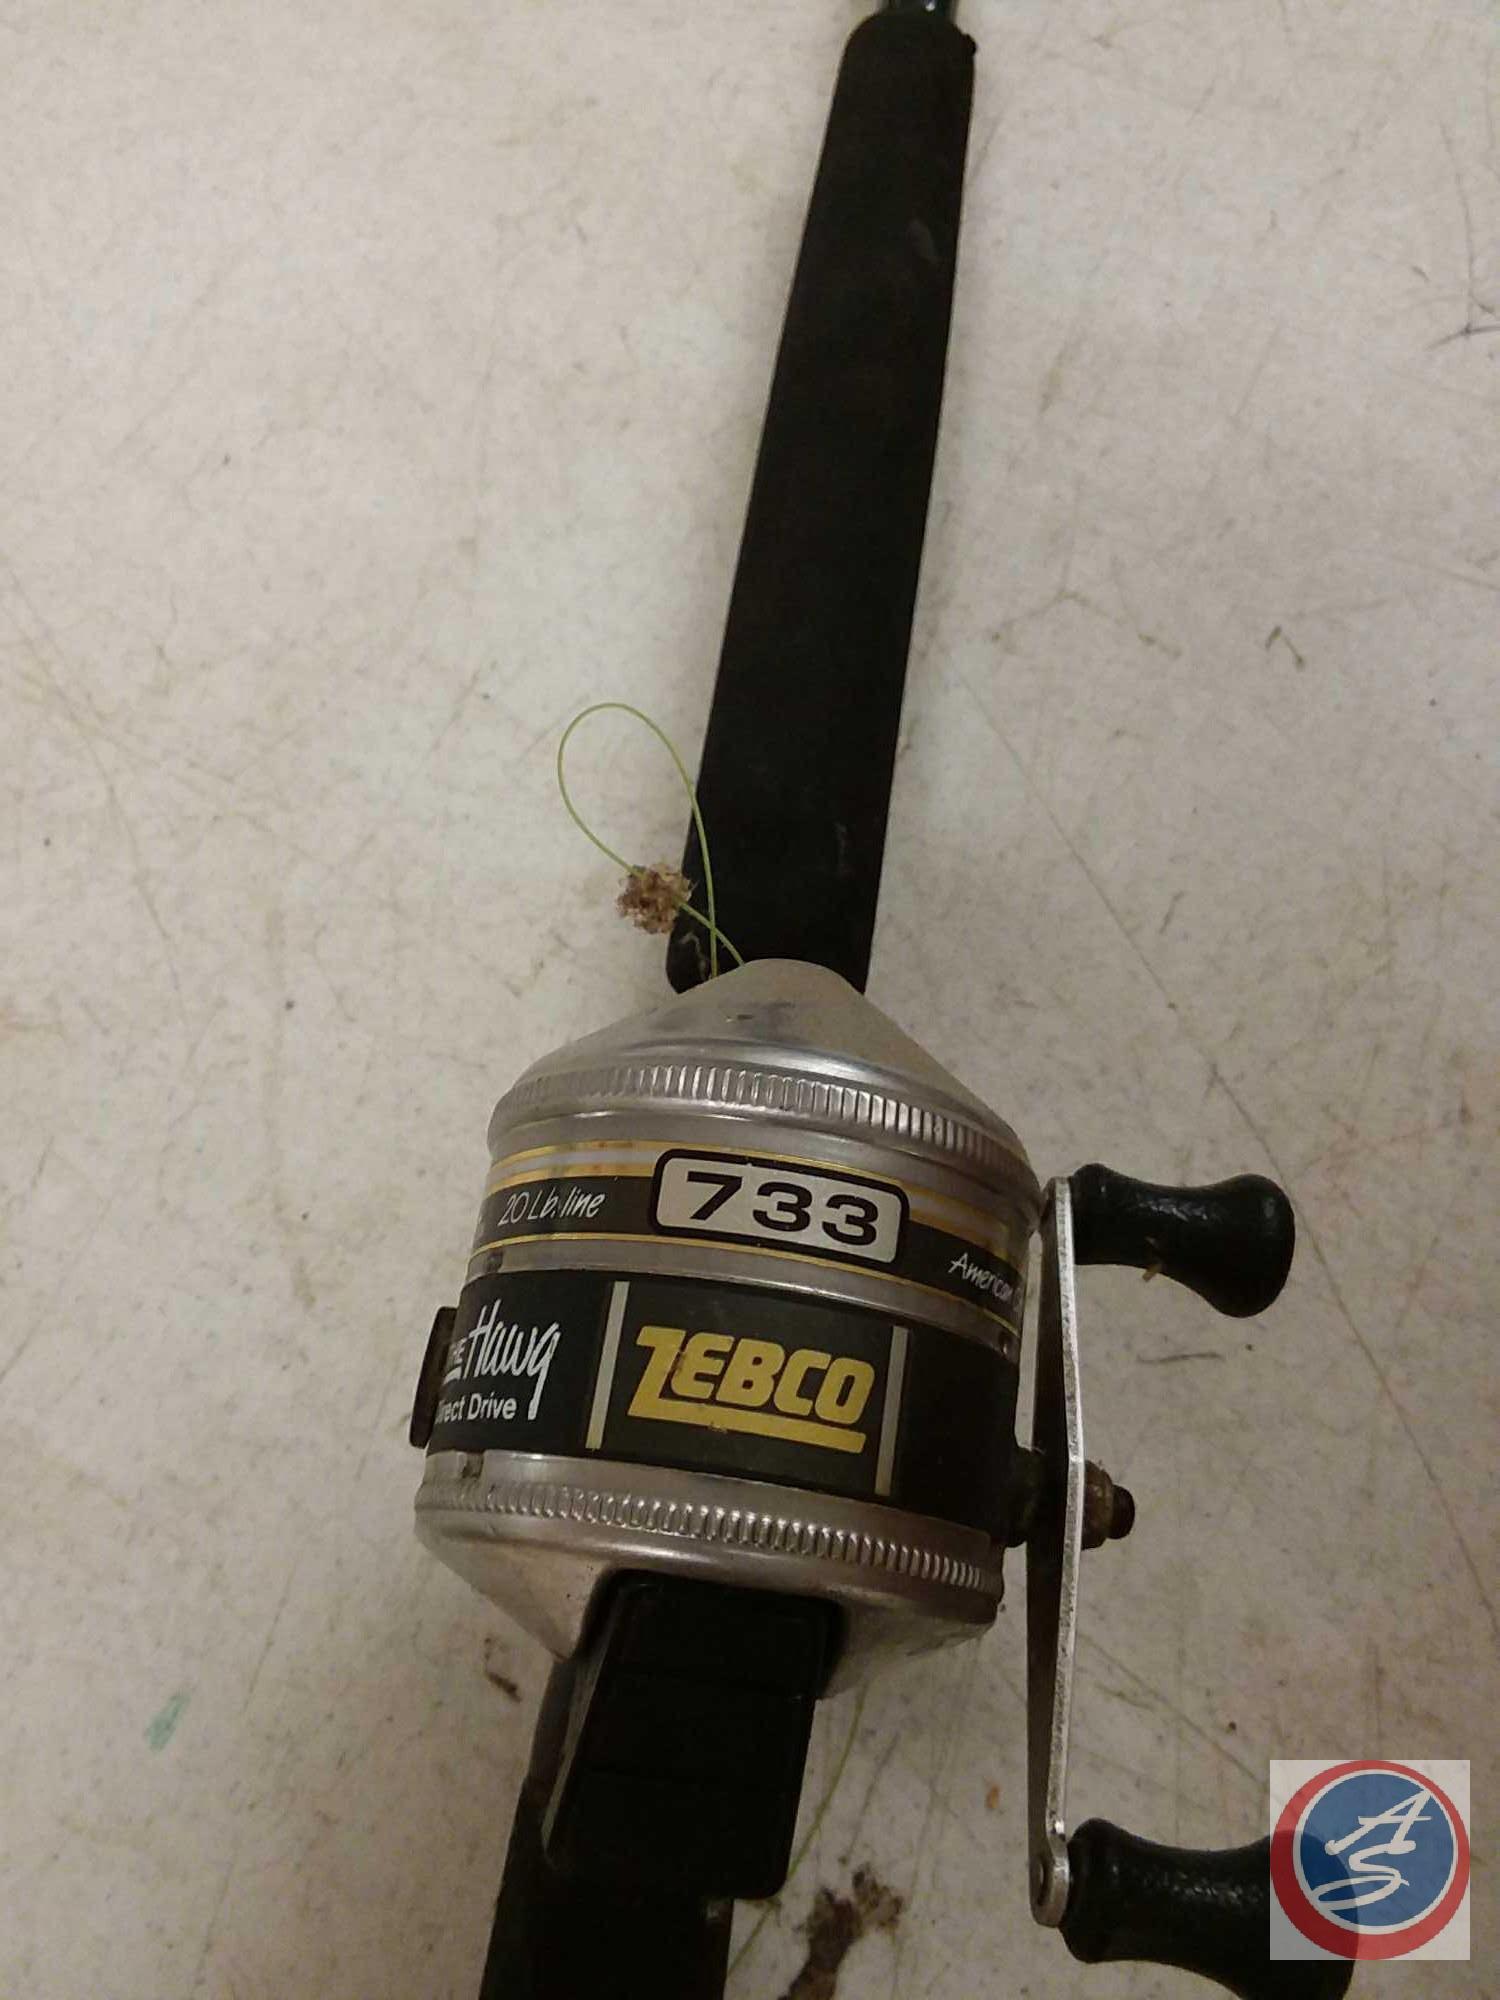 The Hawg Direct Drive Zebco 733 Fishing Reel 